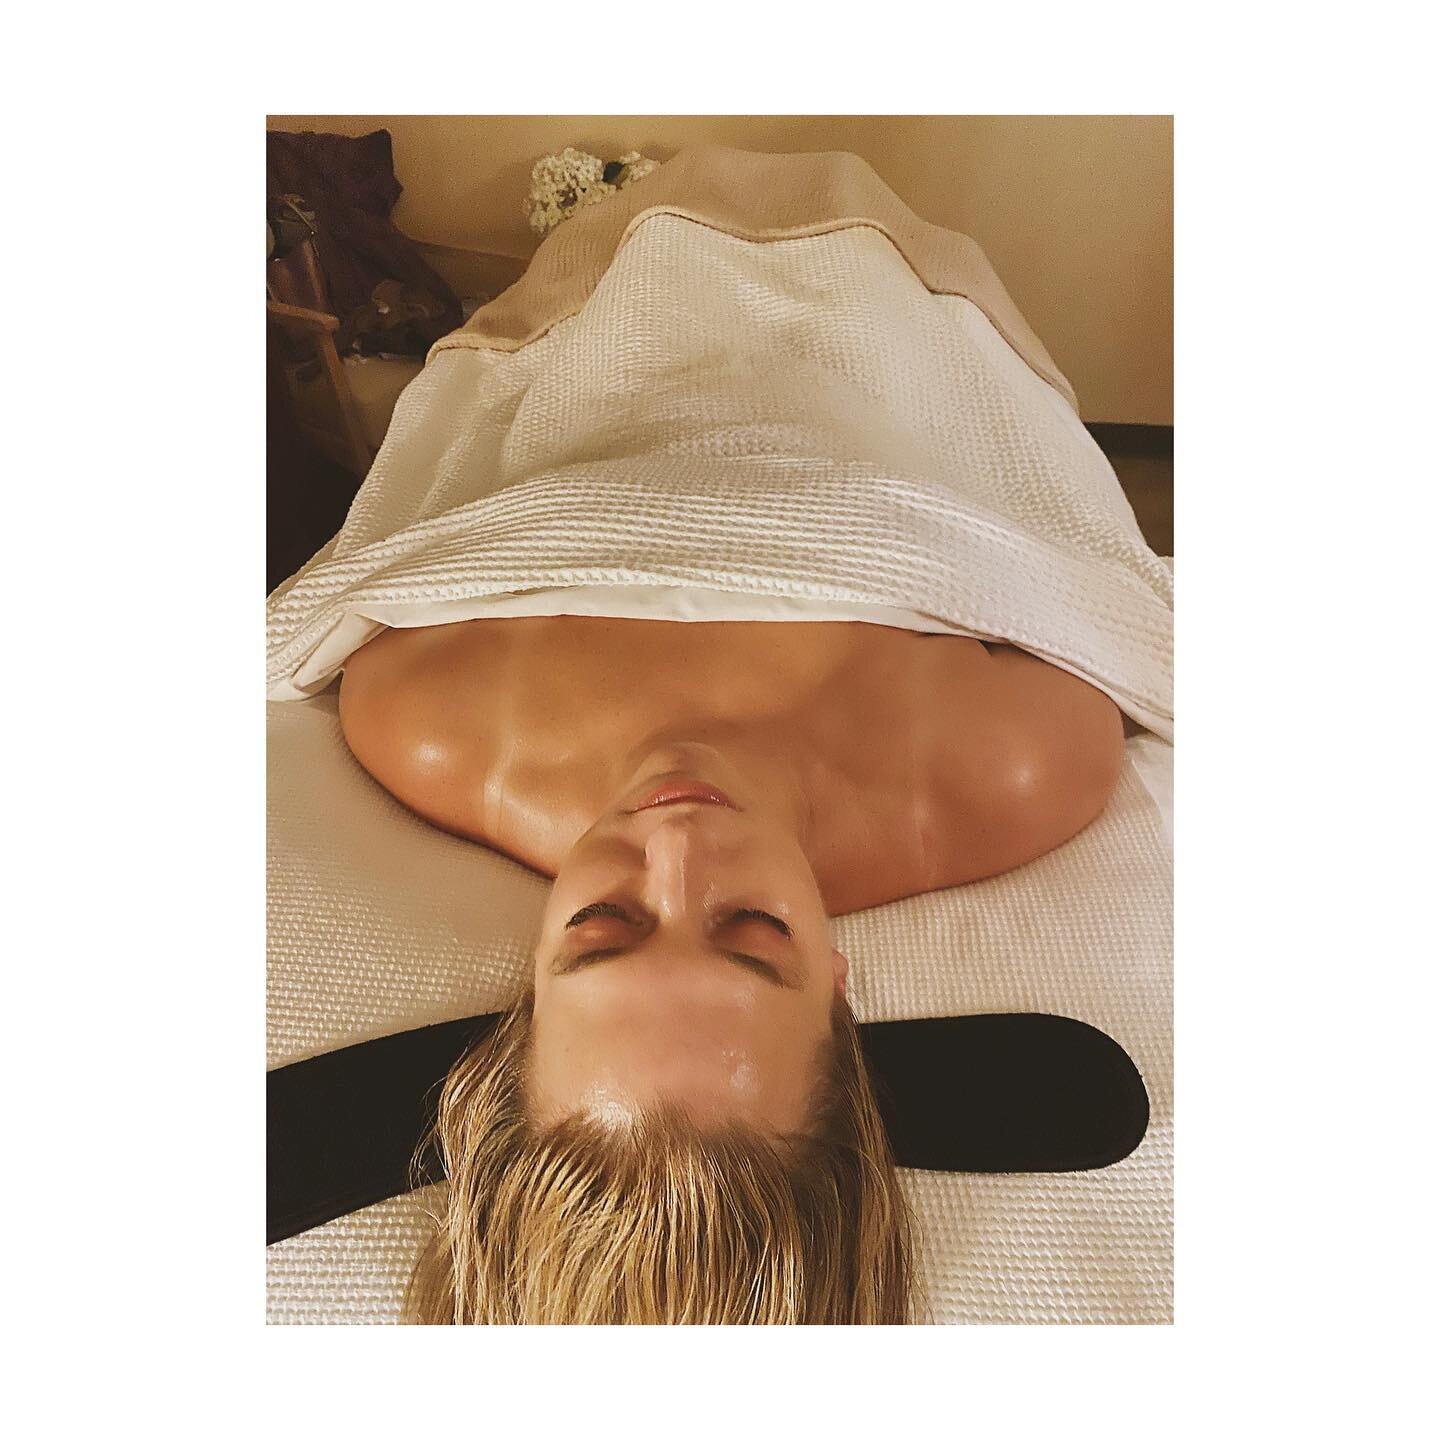 There&rsquo;s this point in treatments that I feel the client go into full rest mode- surrendered to the experience, glowing, at peace. It&rsquo;s the sweetest thing to see and best part of this room. 

I snapped this photo of my beautiful friend @je